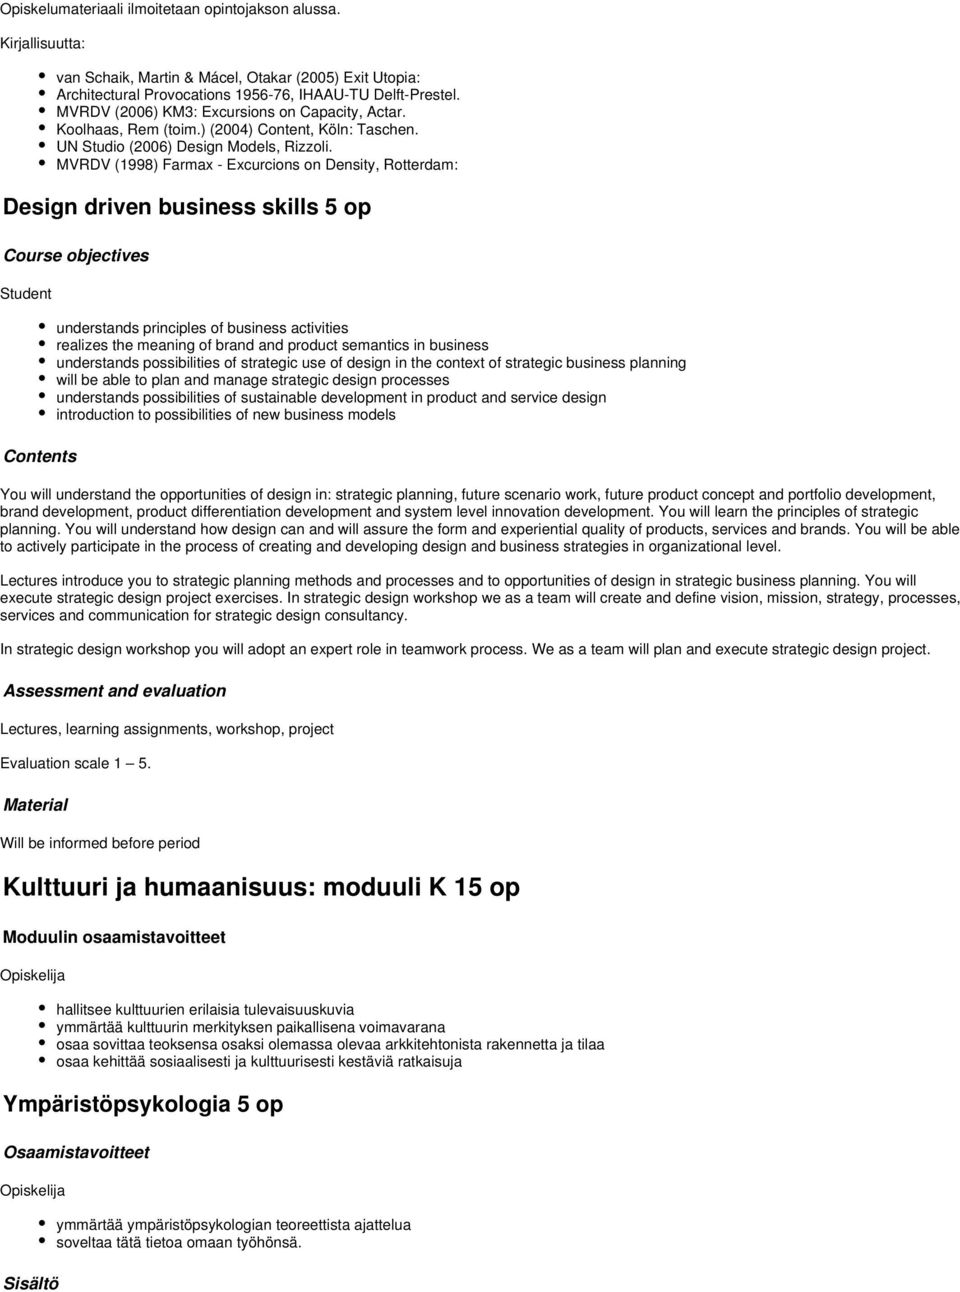 MVRDV (1998) Farmax - Excurcions on Density, Rotterdam: Design driven business skills op Course objectives Student Contents understands principles of business activities realizes the meaning of brand